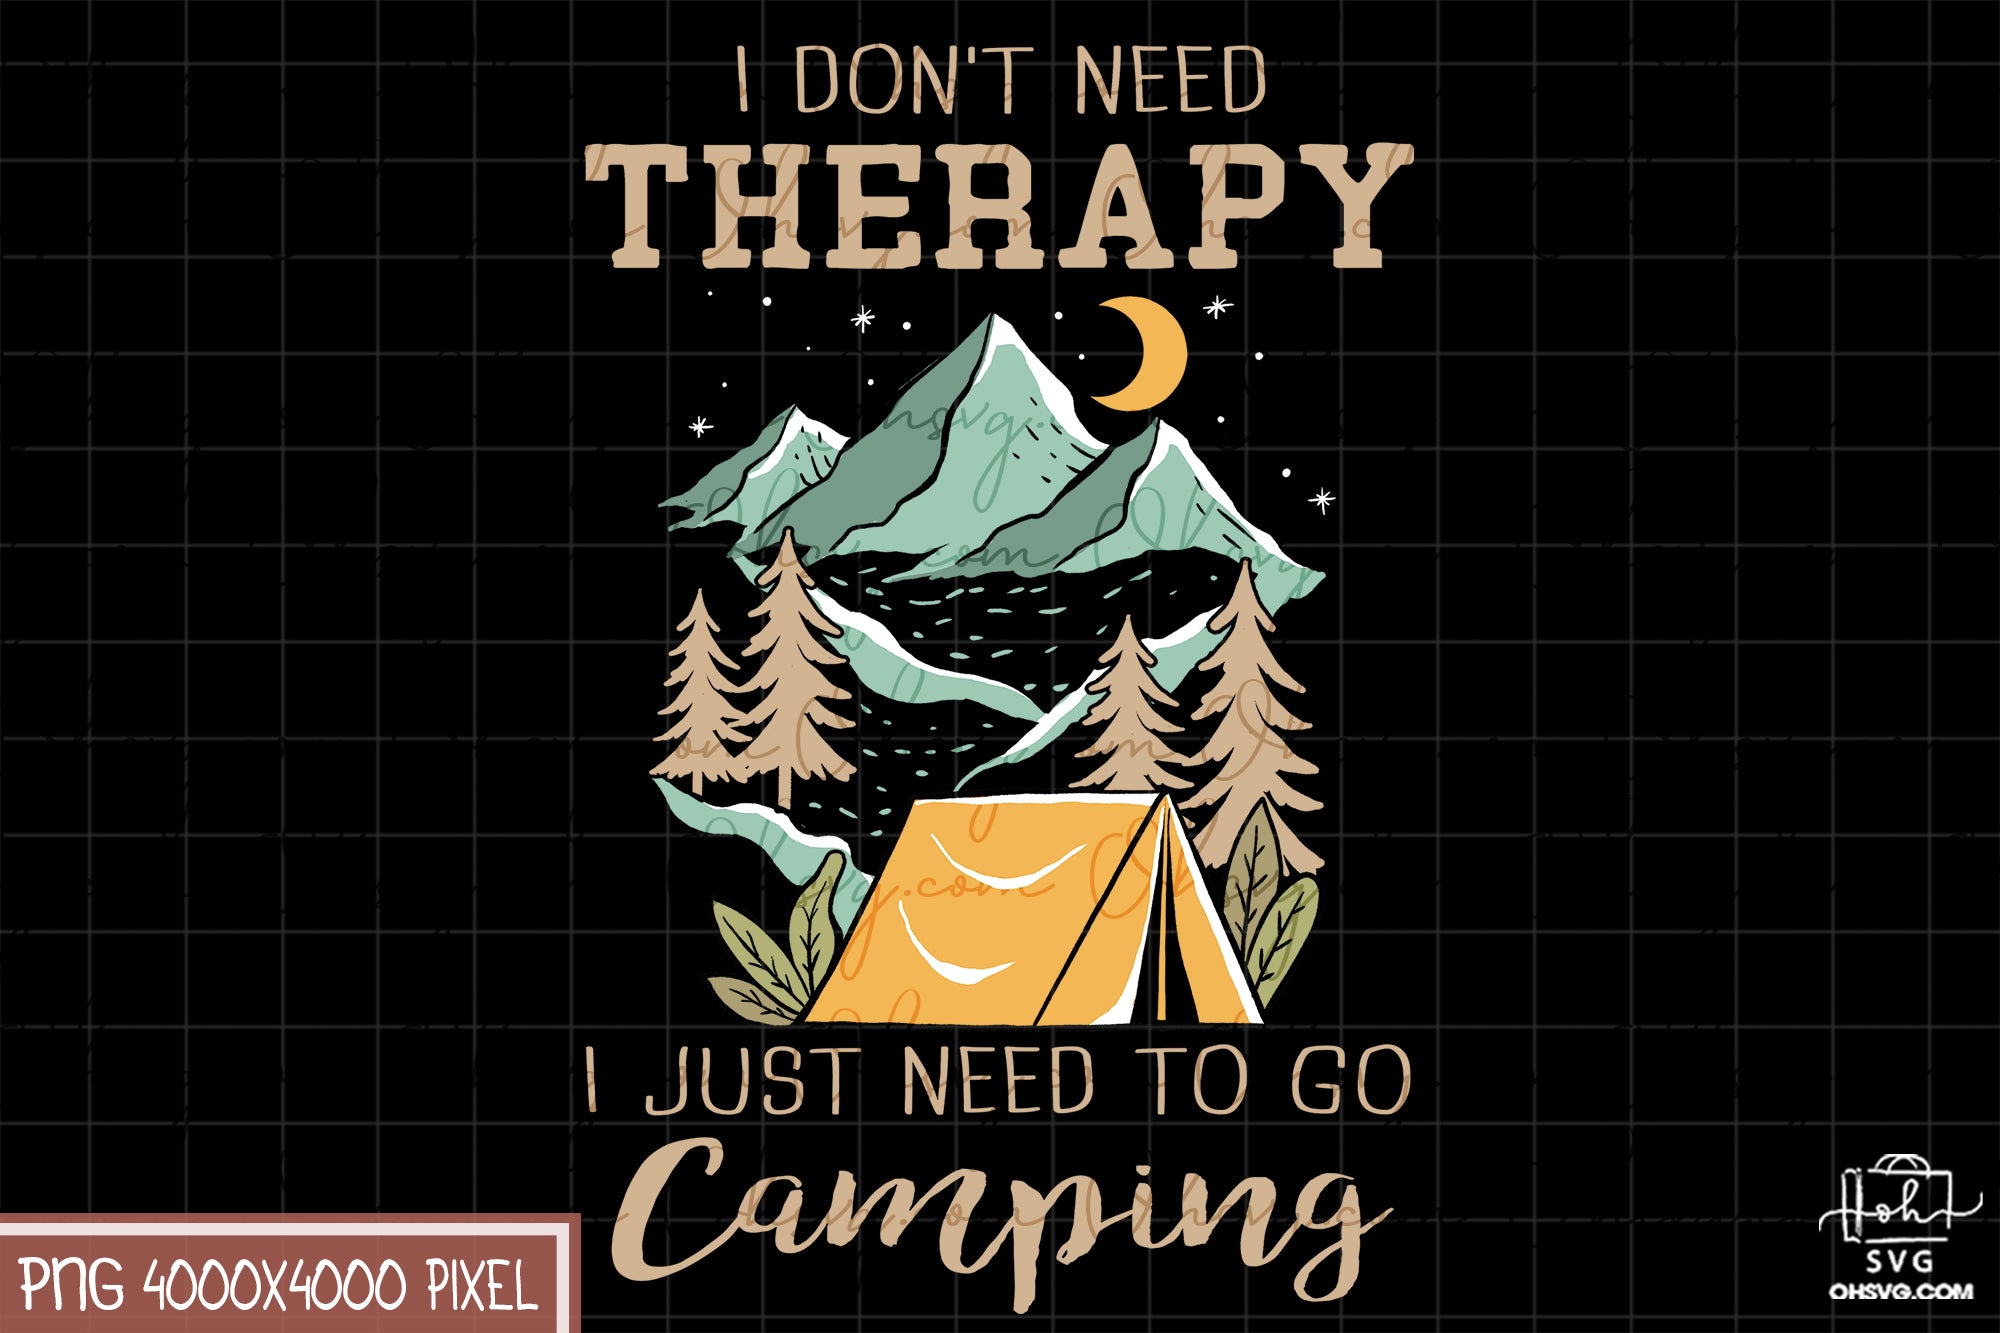 I Just Need to Go Camping Sublimation PNG, Camping Life PNG, Camping Outdoor PNG